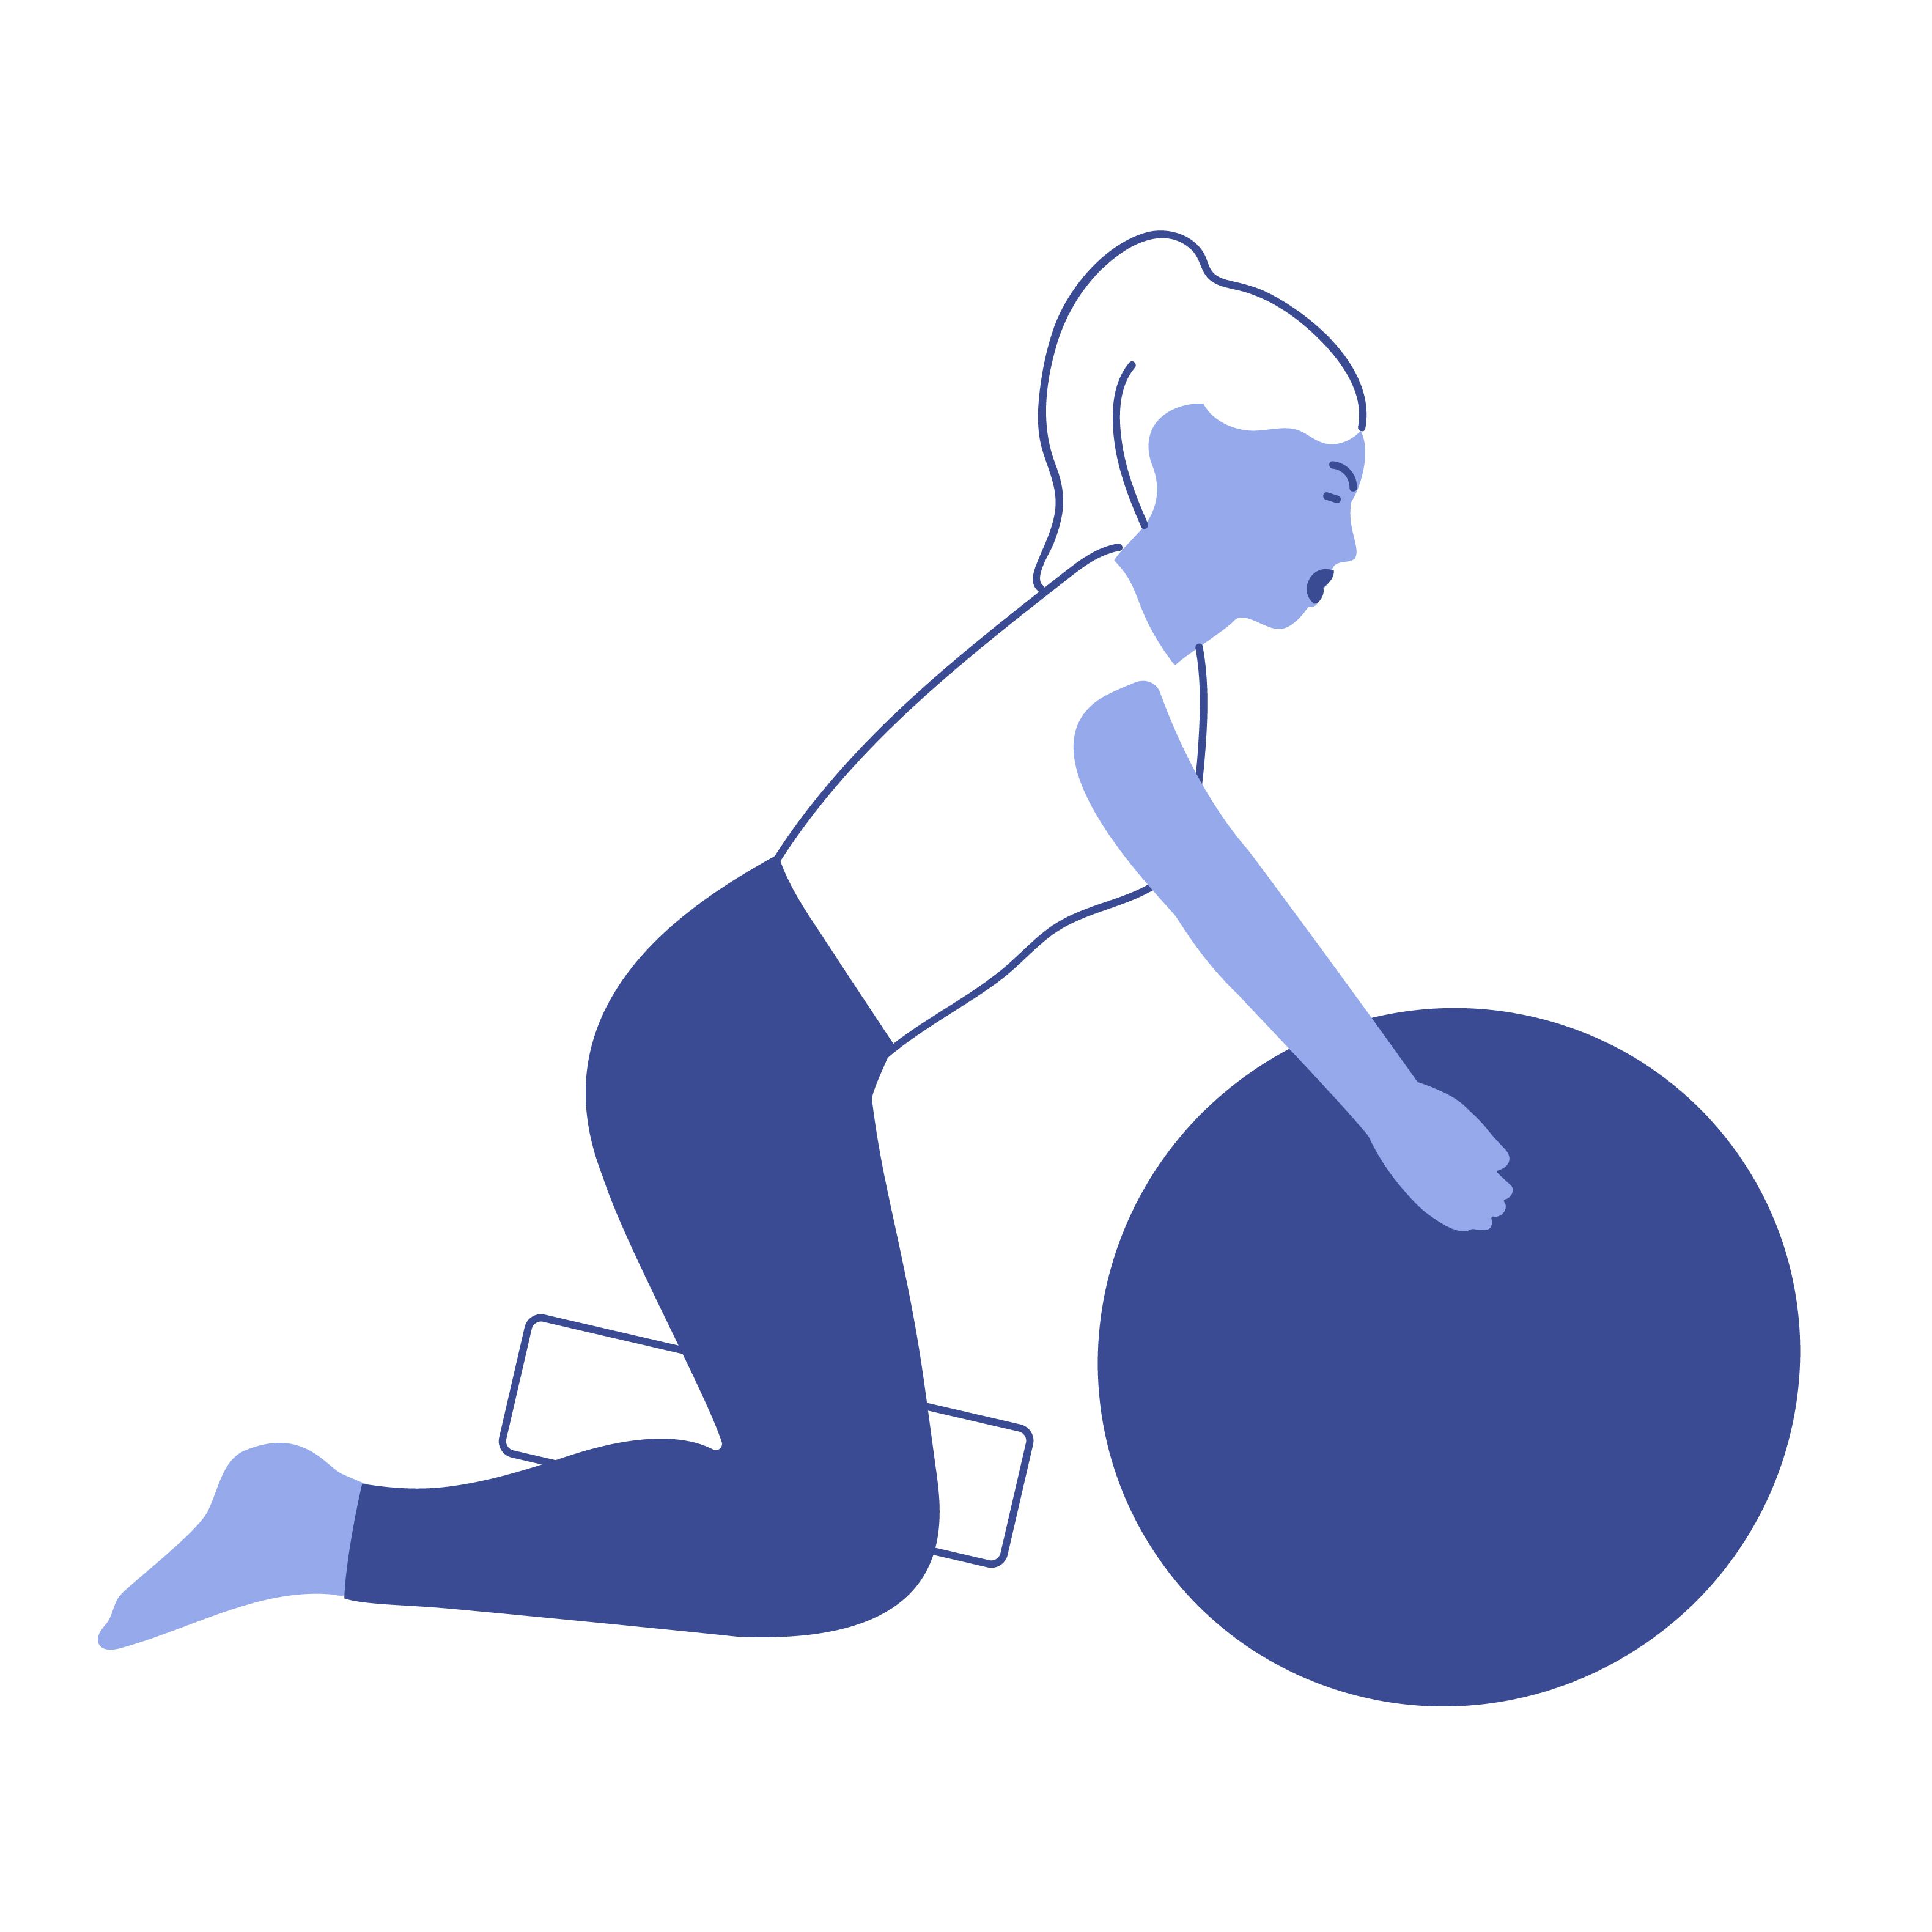 carrying a heavy ball exercises clipart